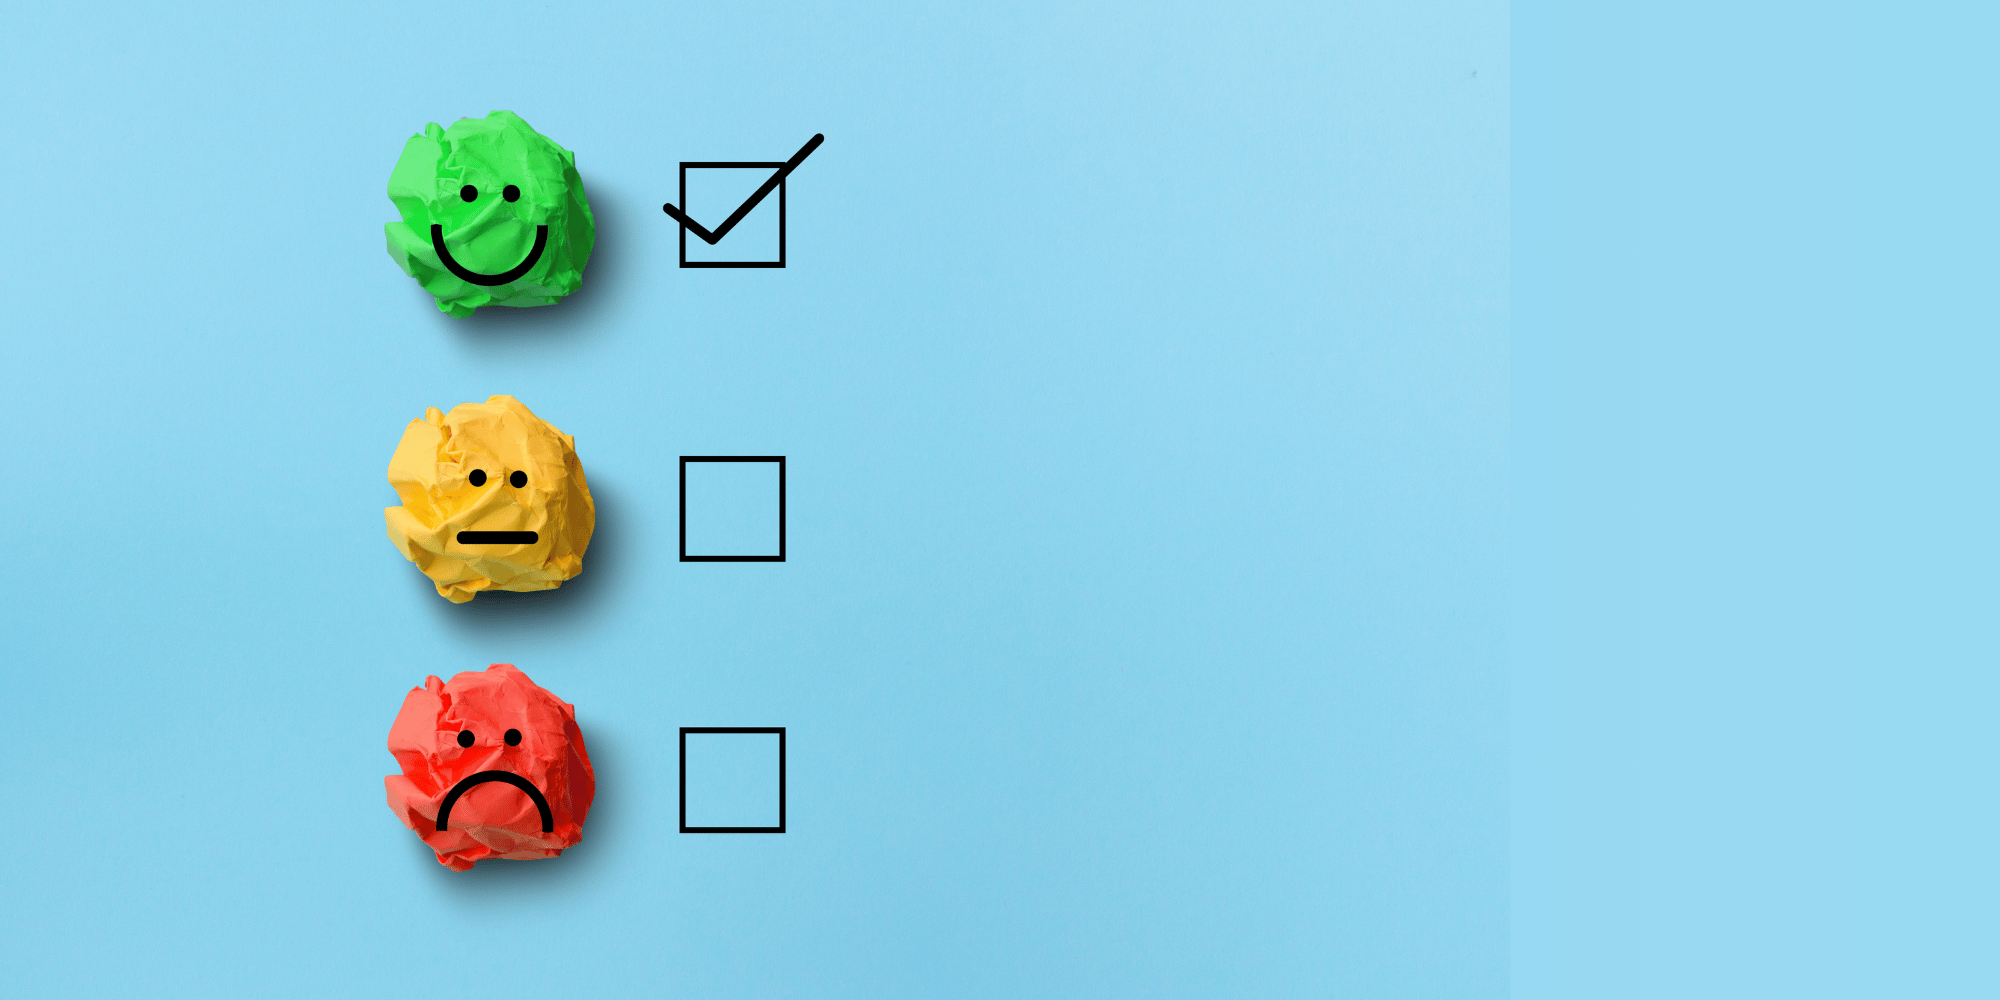 Three crumpled balls of paper lined up one above the other. They are the color of a traffic light with green at the top, yellow in the center, and red at the end. Each has a little face over it green is happy, yellow is neutral, and red is sad. Next to each is a little check box. The only box with a check in it is the one next to the green smiley face.